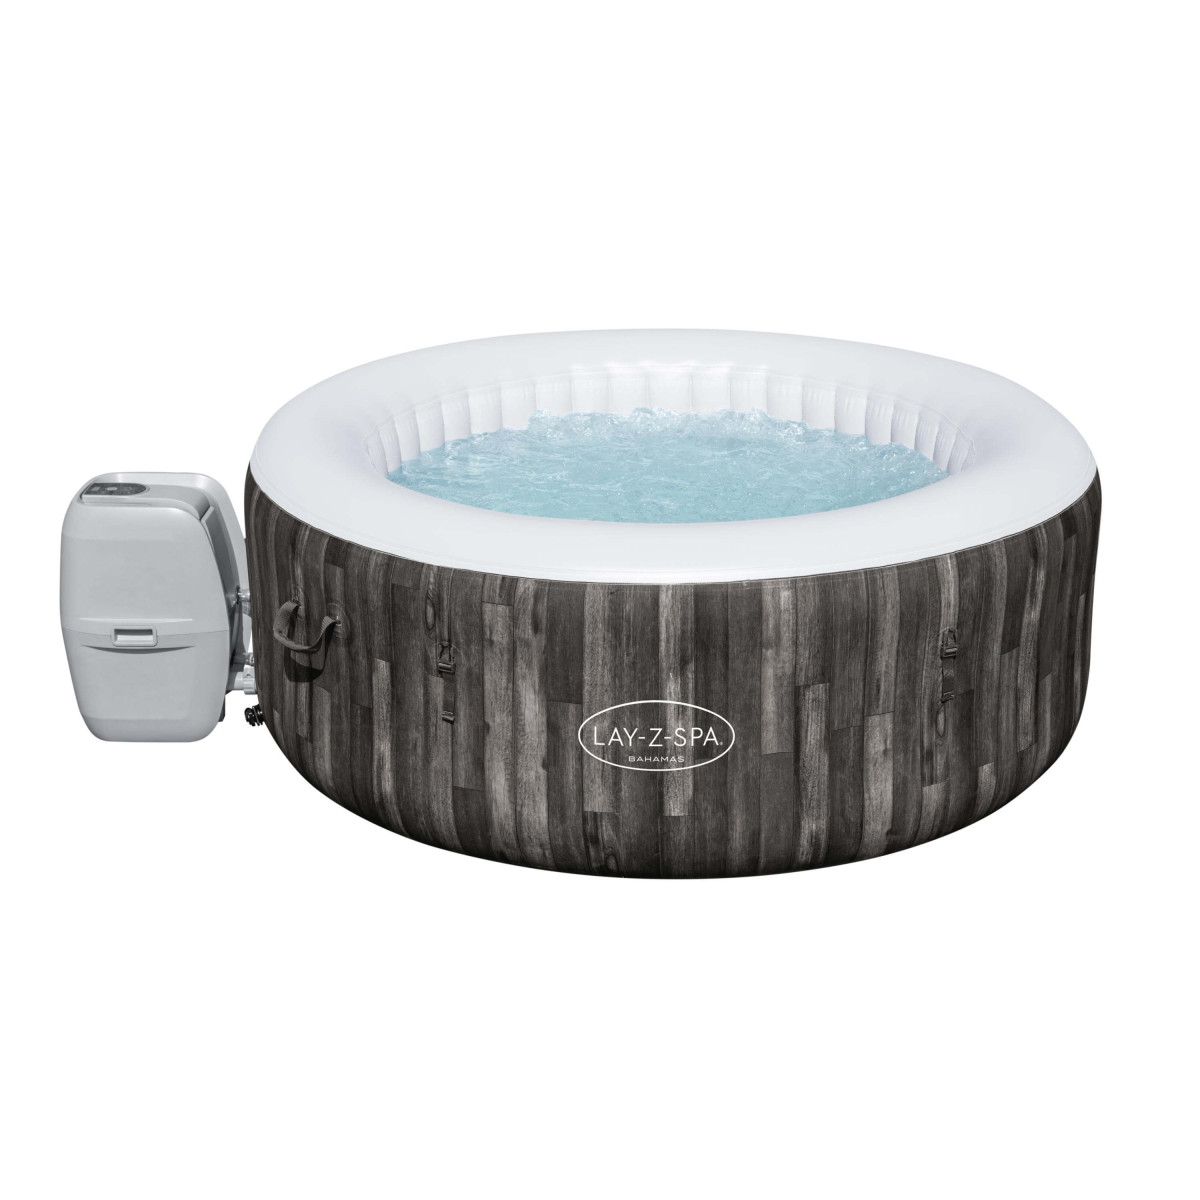 https://www.mypiscine.com/25956-thickbox_default/spa-gonflable-bestway-lay-z-spa-bahamas-rond-2-a-4-places-airjet.jpg